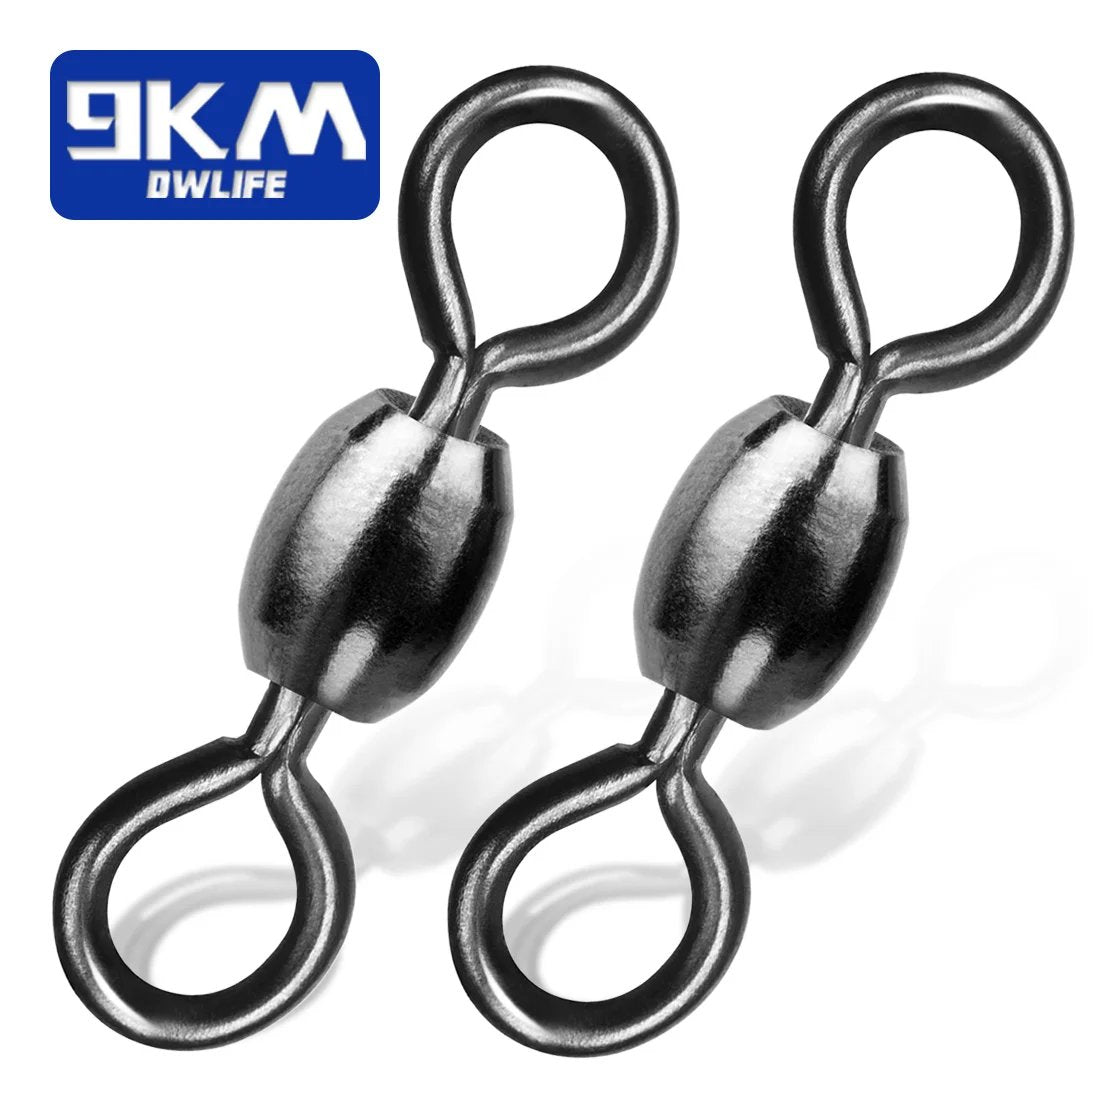 50-200pcs Stainless Steel Fishing Long Line Clips Snap Saltwater Strength  Sea Tuna Fishing Hook Connector Swivel Snap